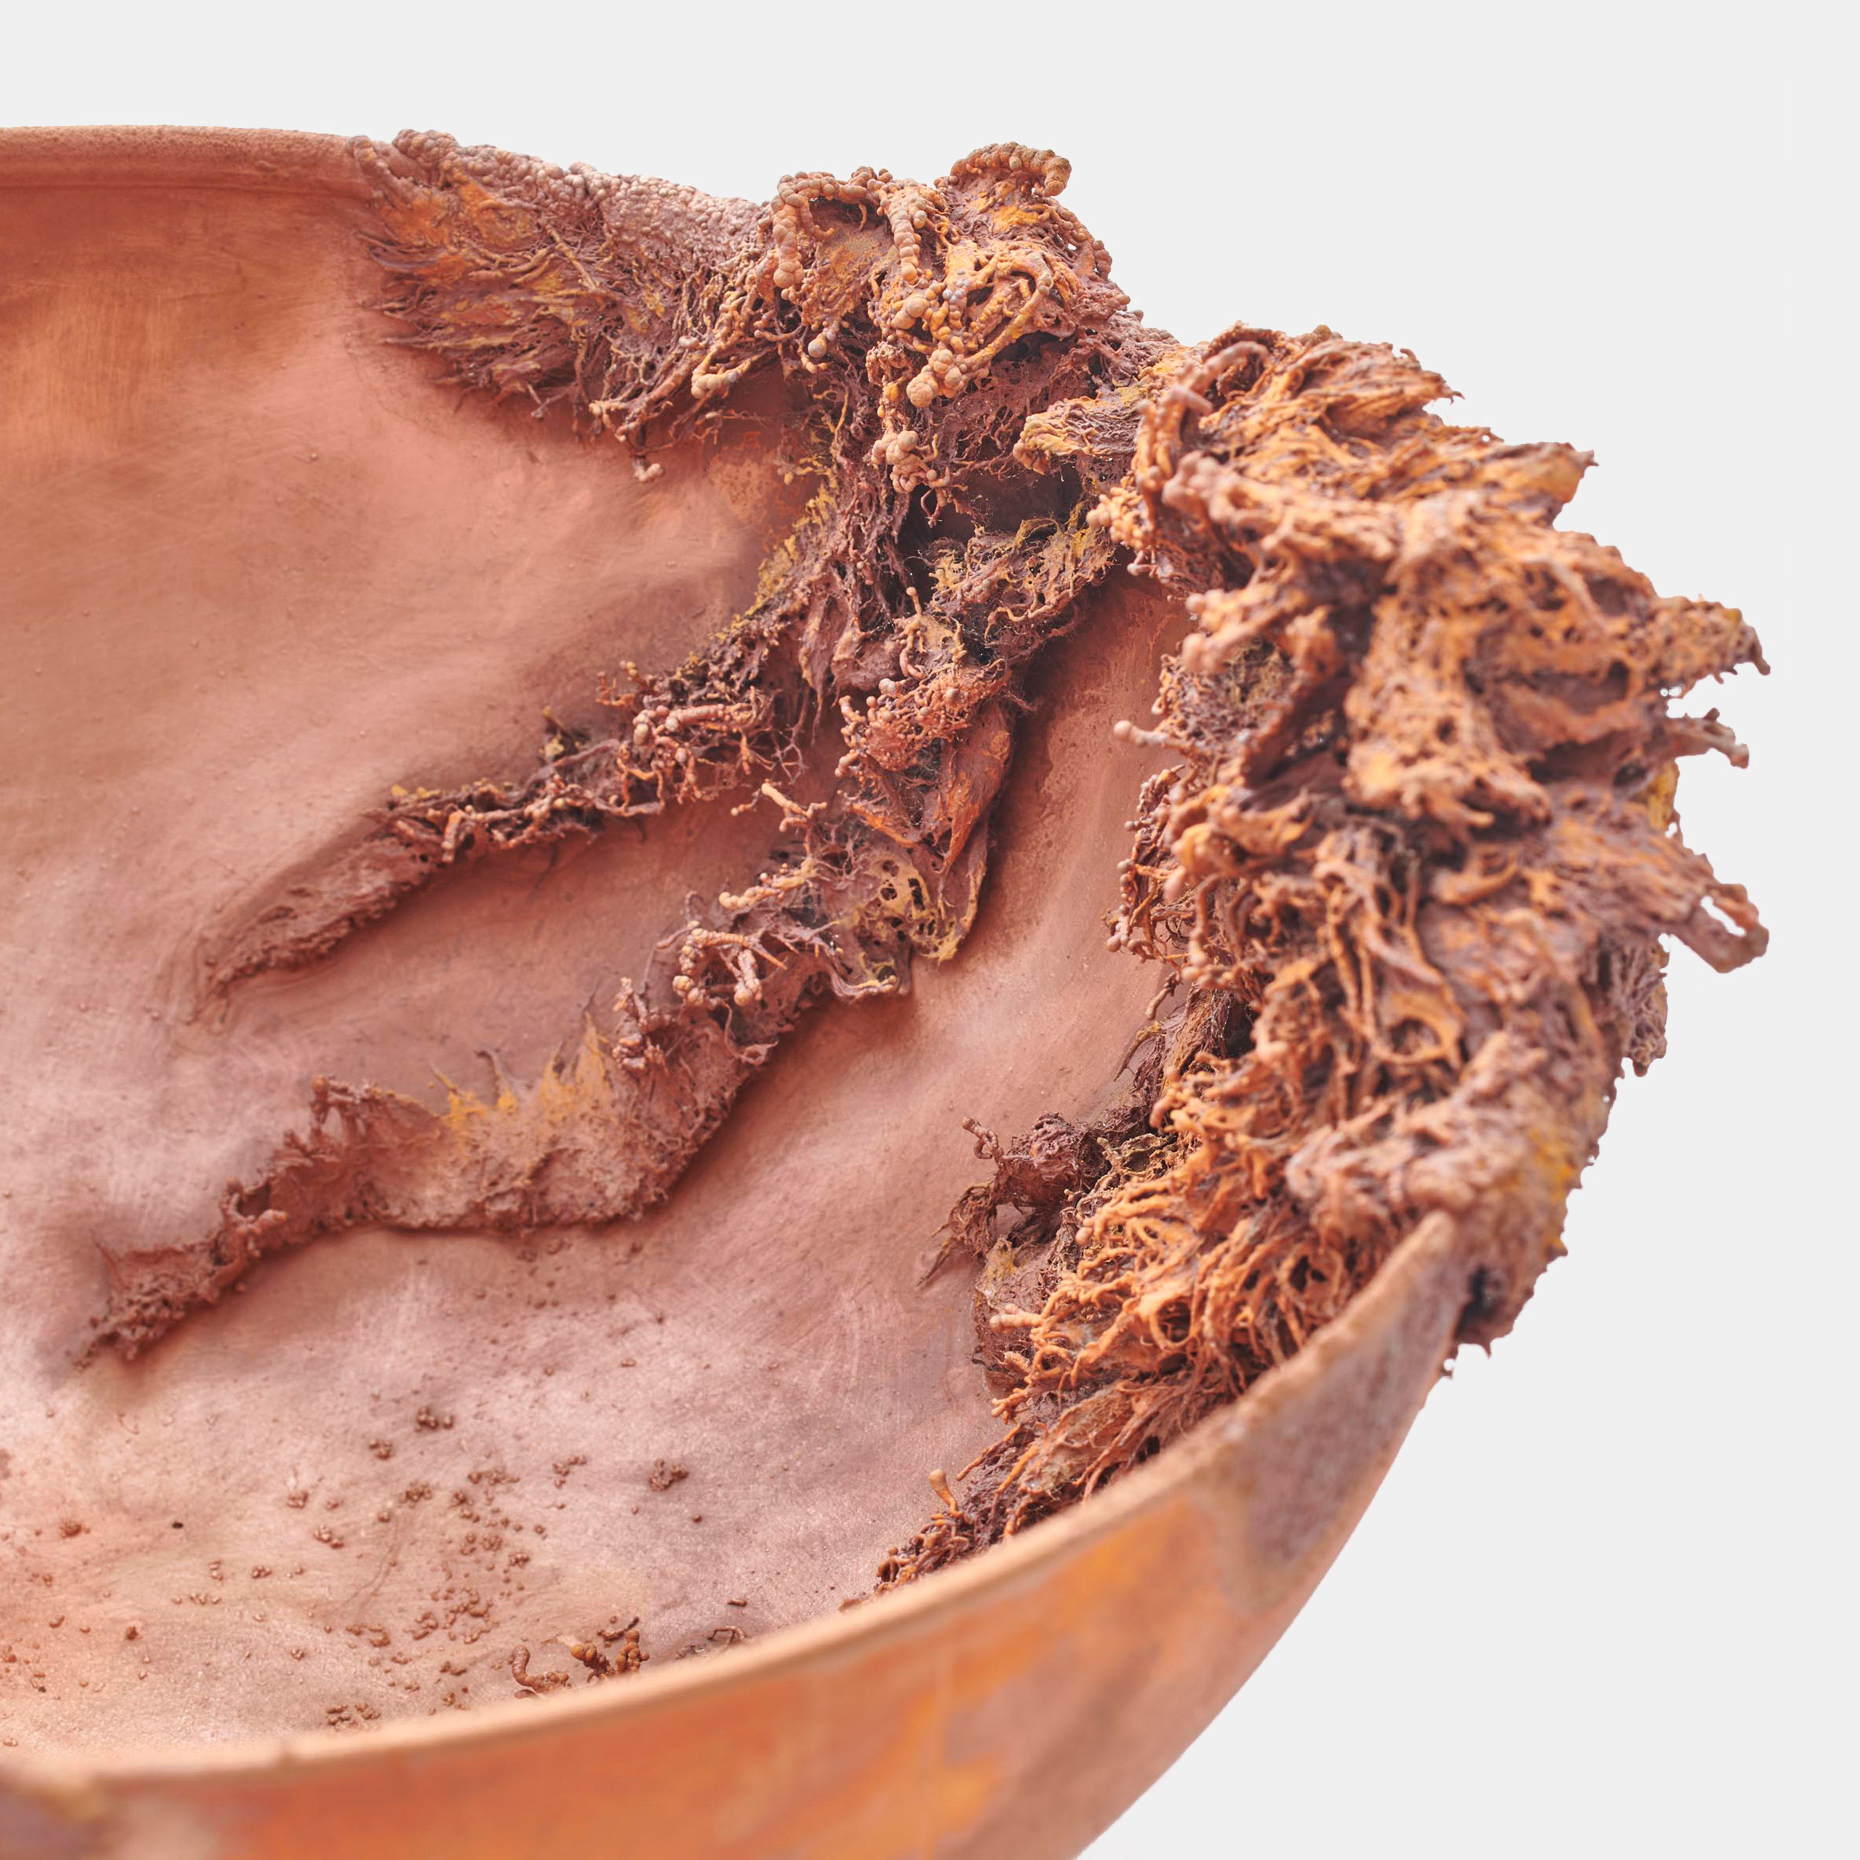 Copper and glass objects imagine future where water is scarce